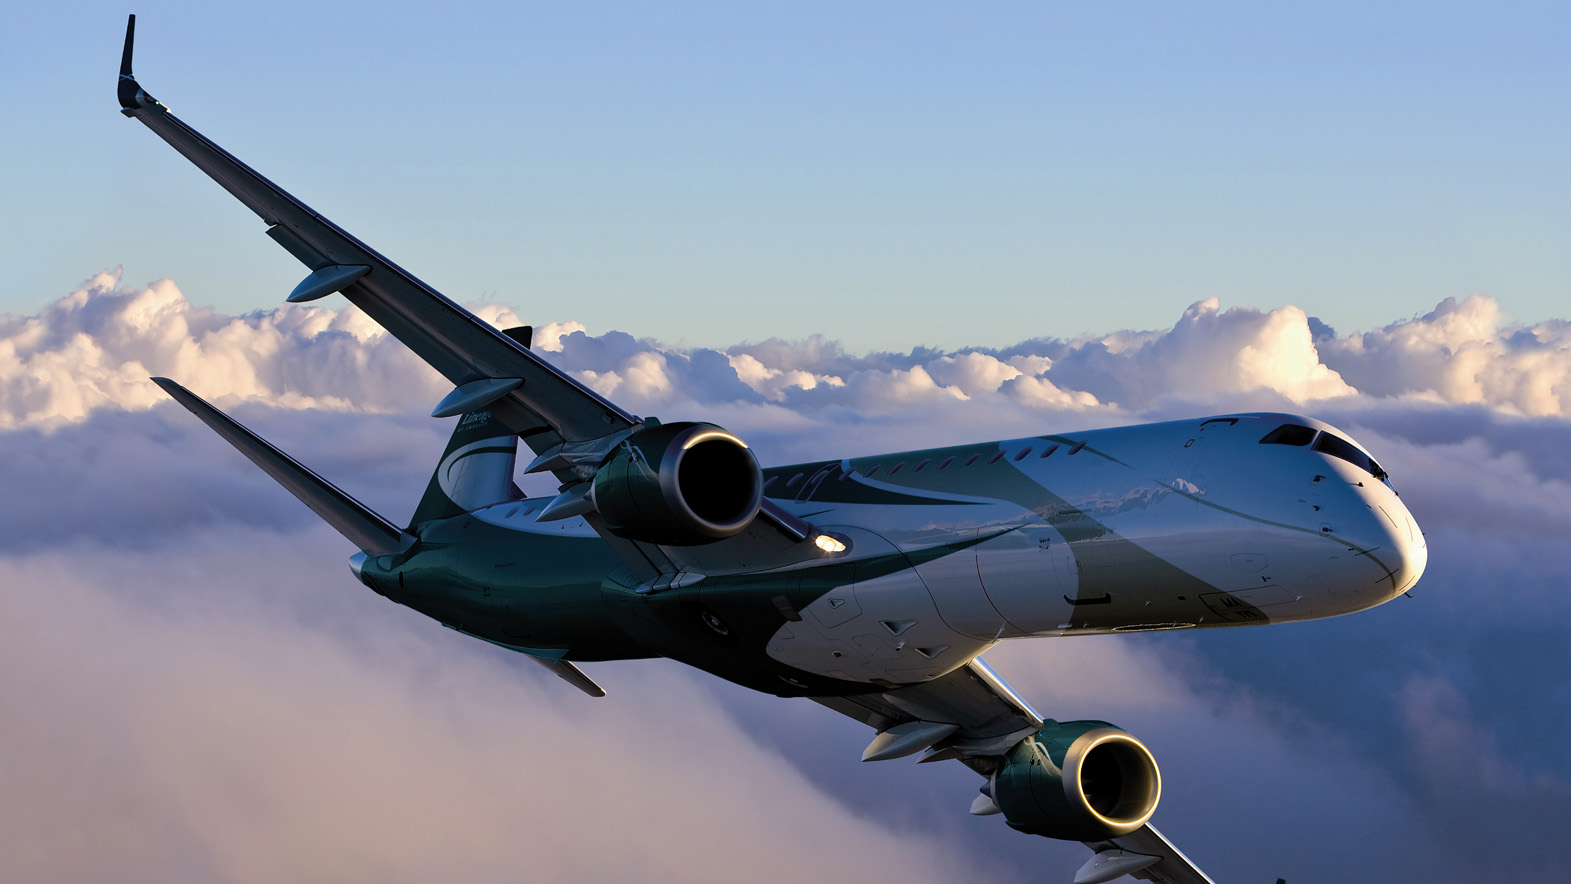 EMBRAER LINEAGE 1000